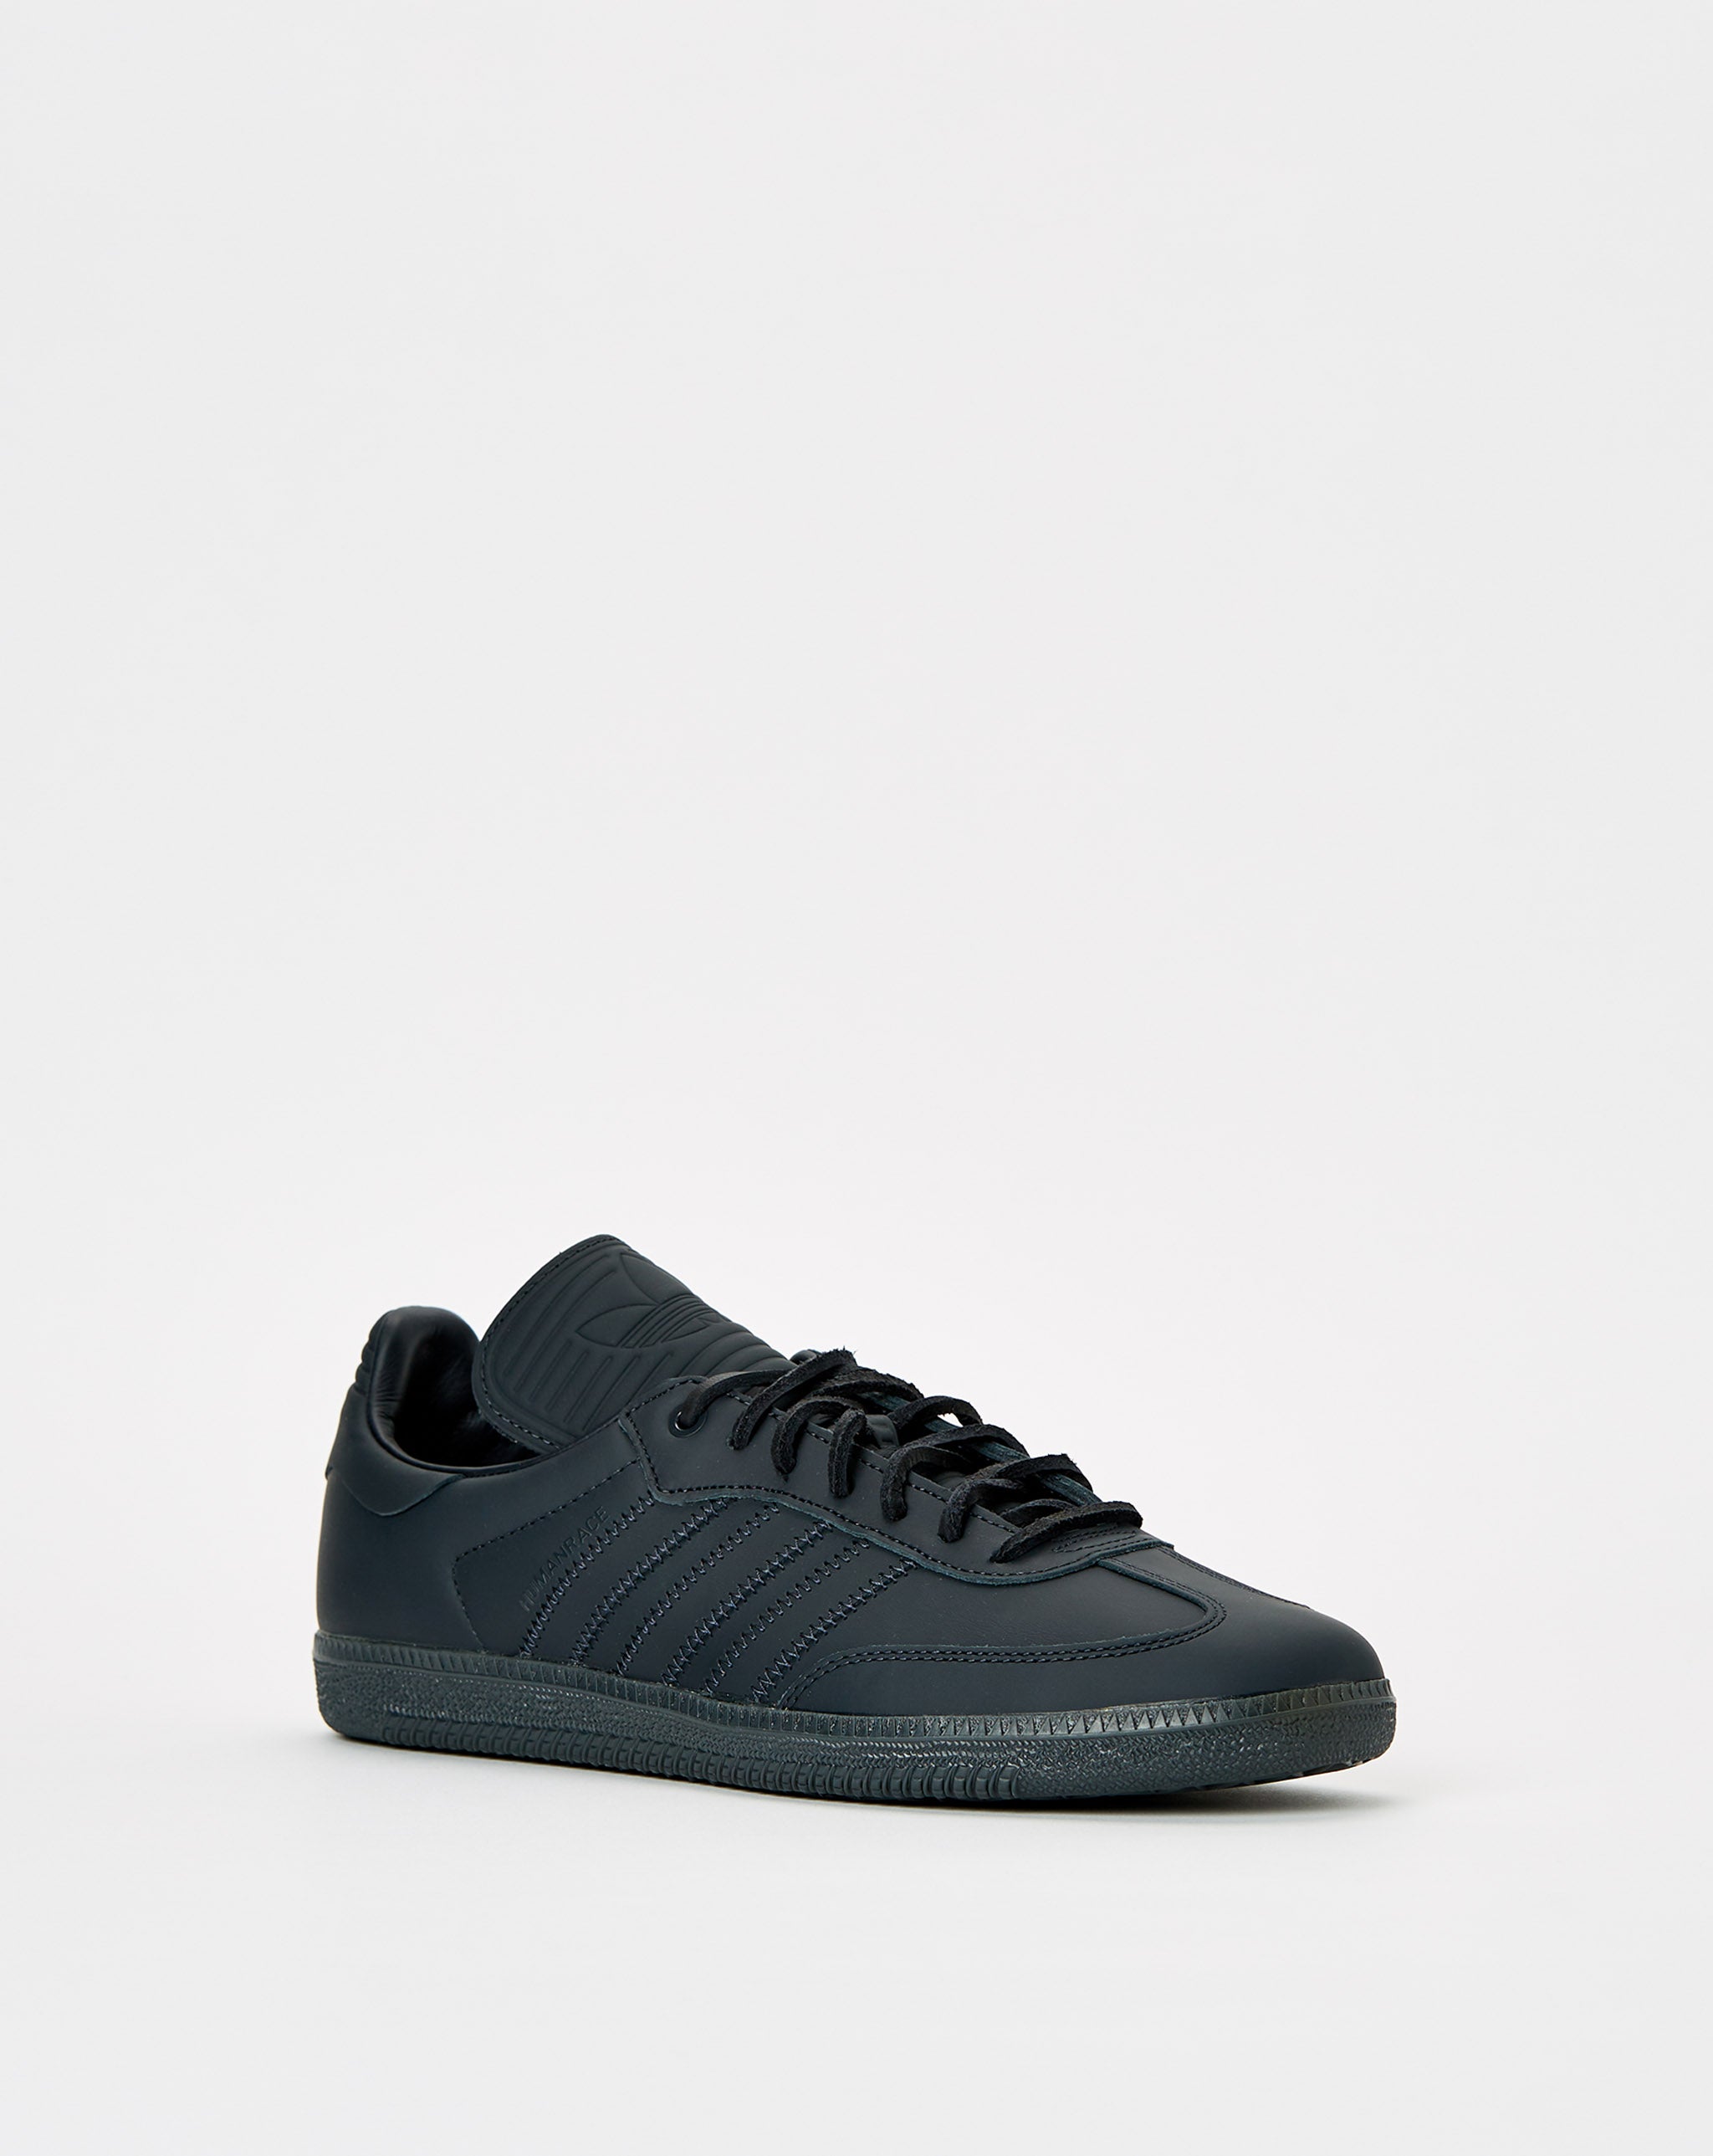 adidas adidas culture and values list  - Cheap Cerbe Jordan outlet